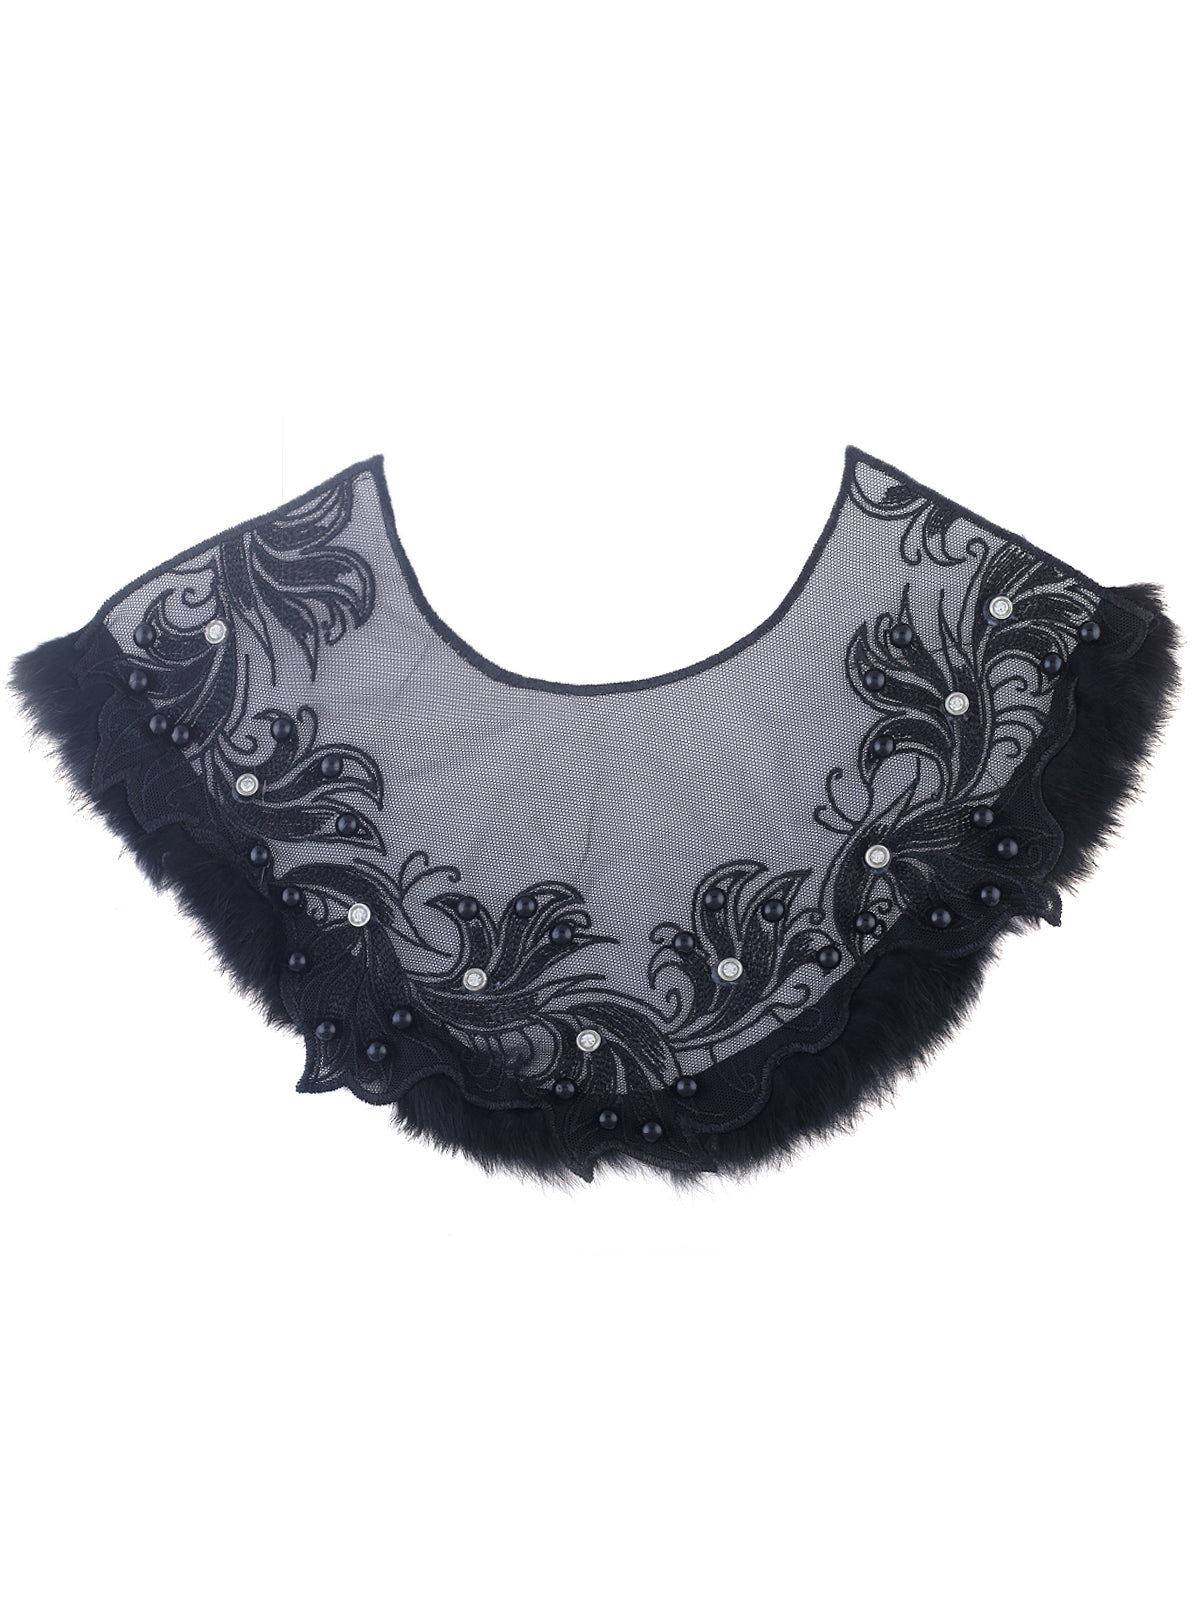 Fashion style Embroidery Black Applique Lace Collar Sewing Lace